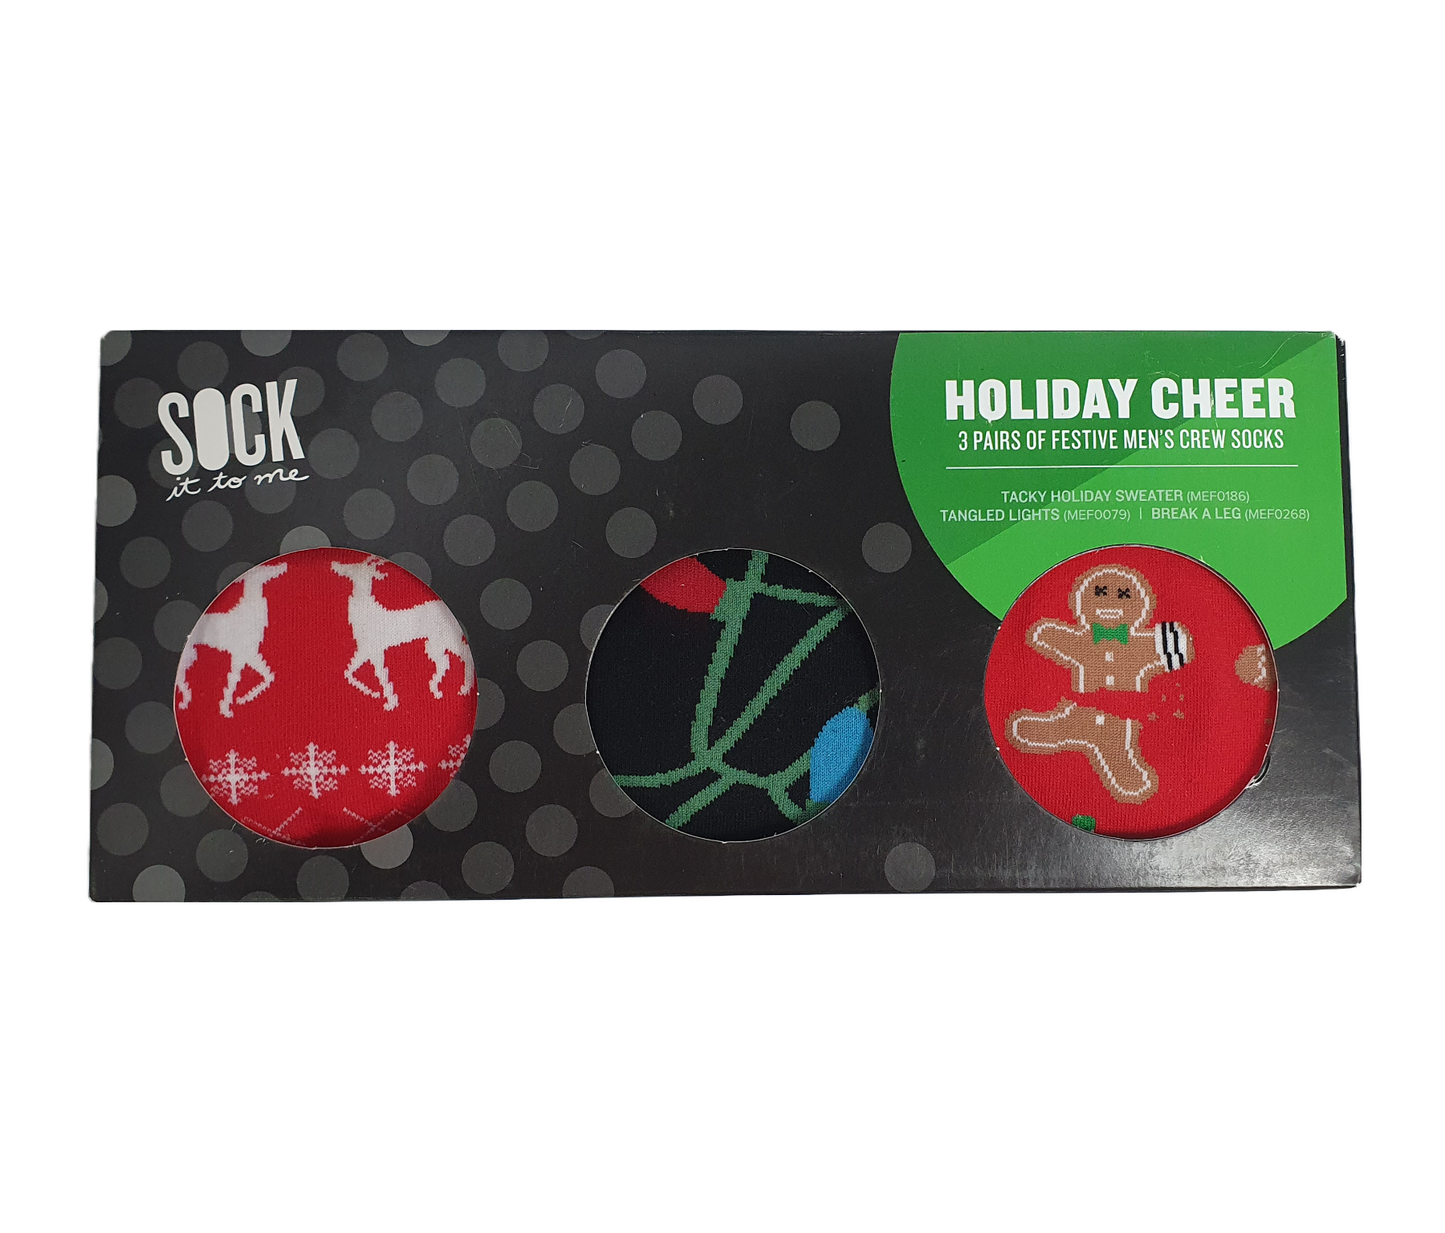 Sock it to Me Holiday Cheer Gift Box Set - Mens Crew: Tacky Holiday Sweater, Tangled Lights, Break a Leg